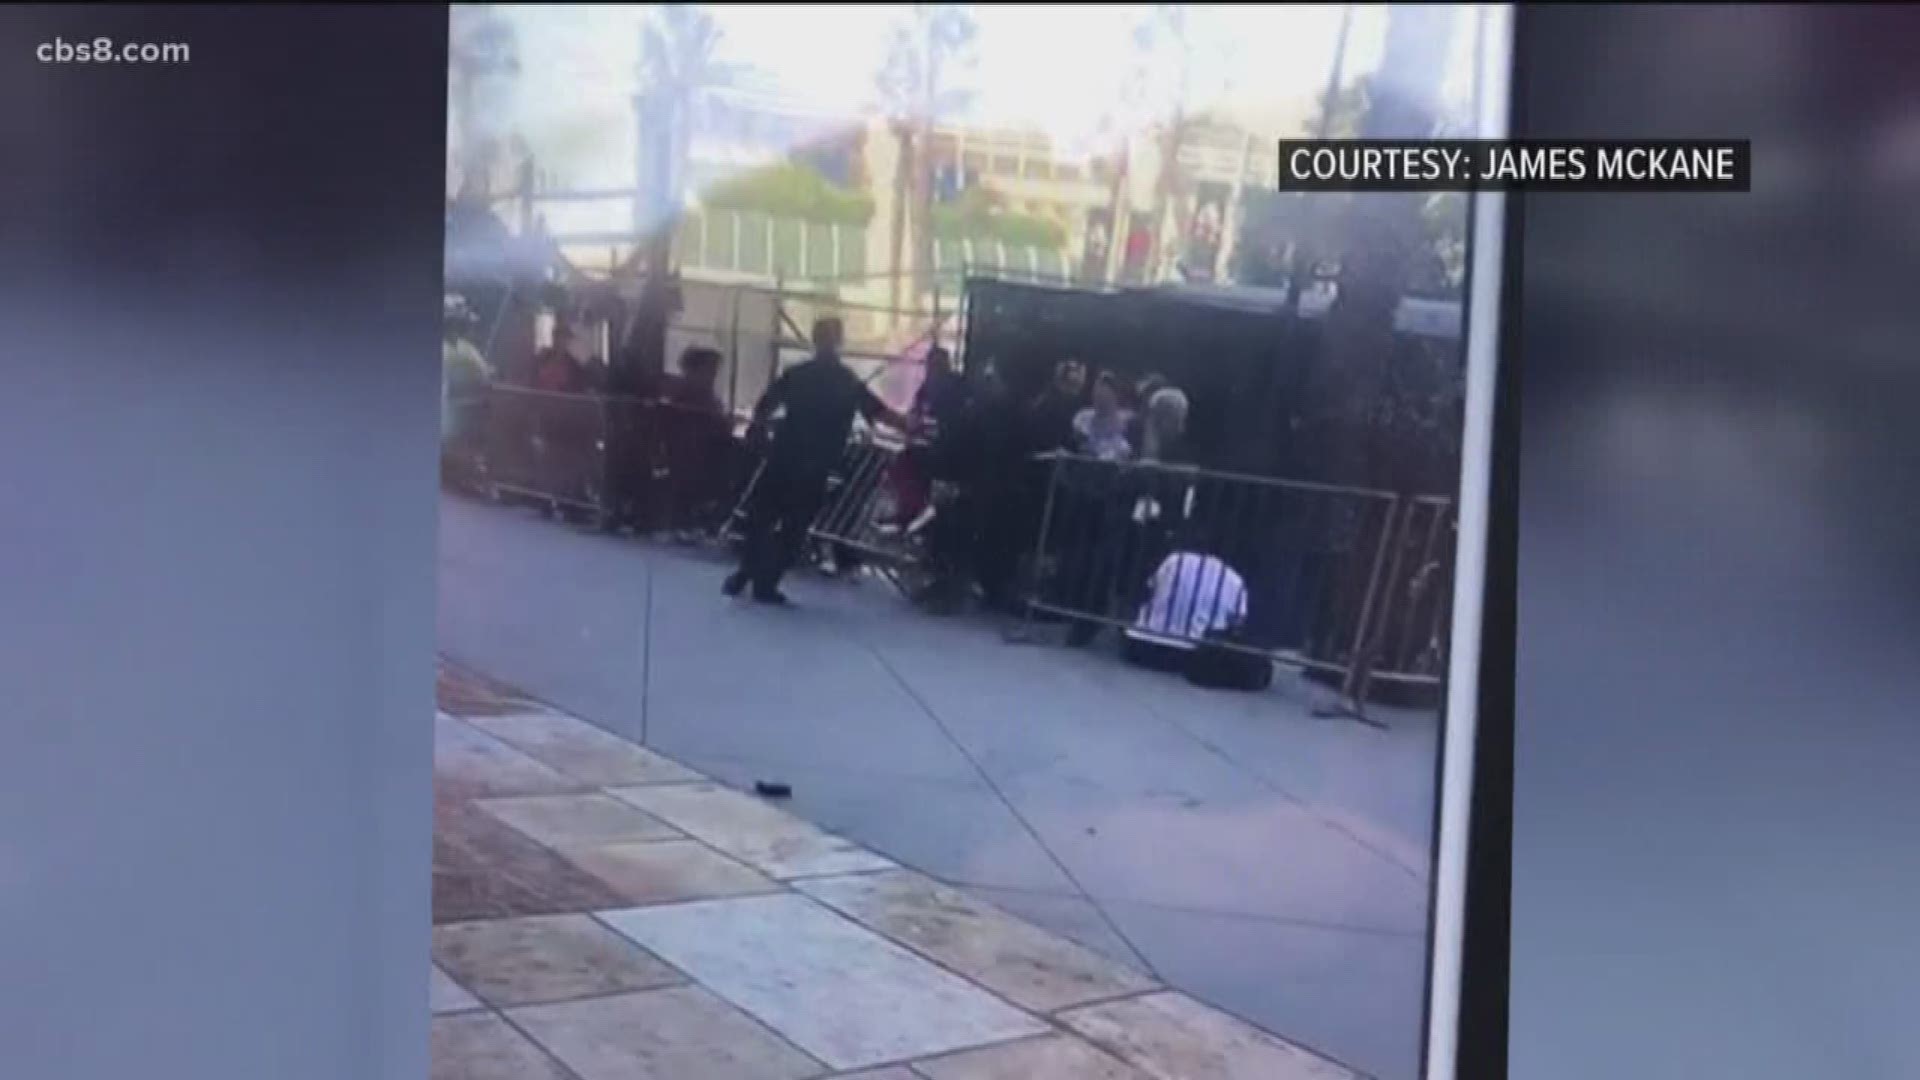 The altercation took place in front of Lou & Mickey’s where News 8 was broadcasting live for Comic-Con.